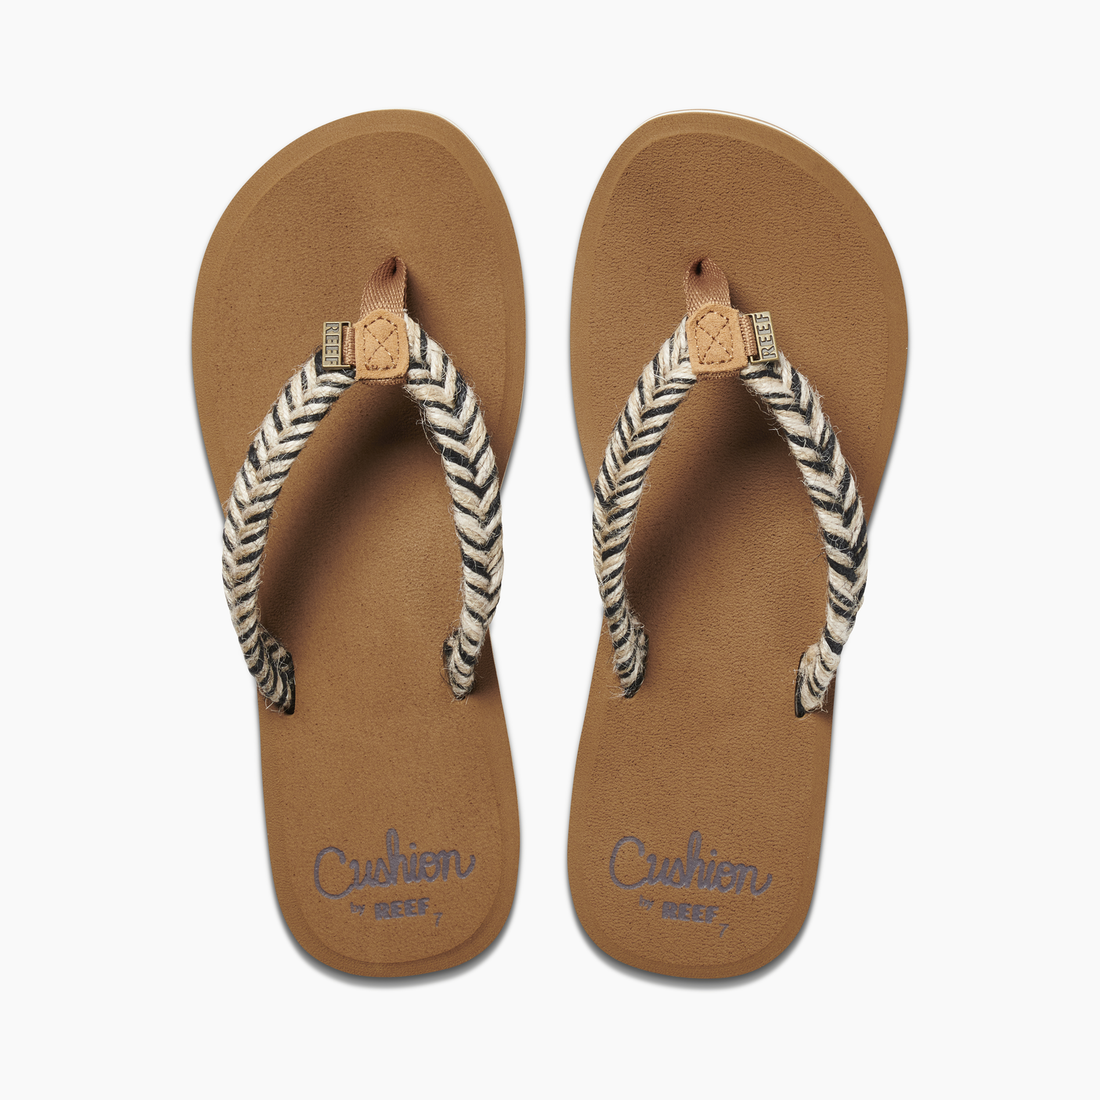 Items You Need In Your Beach Bag: Reef Cushion Break Flip Flop